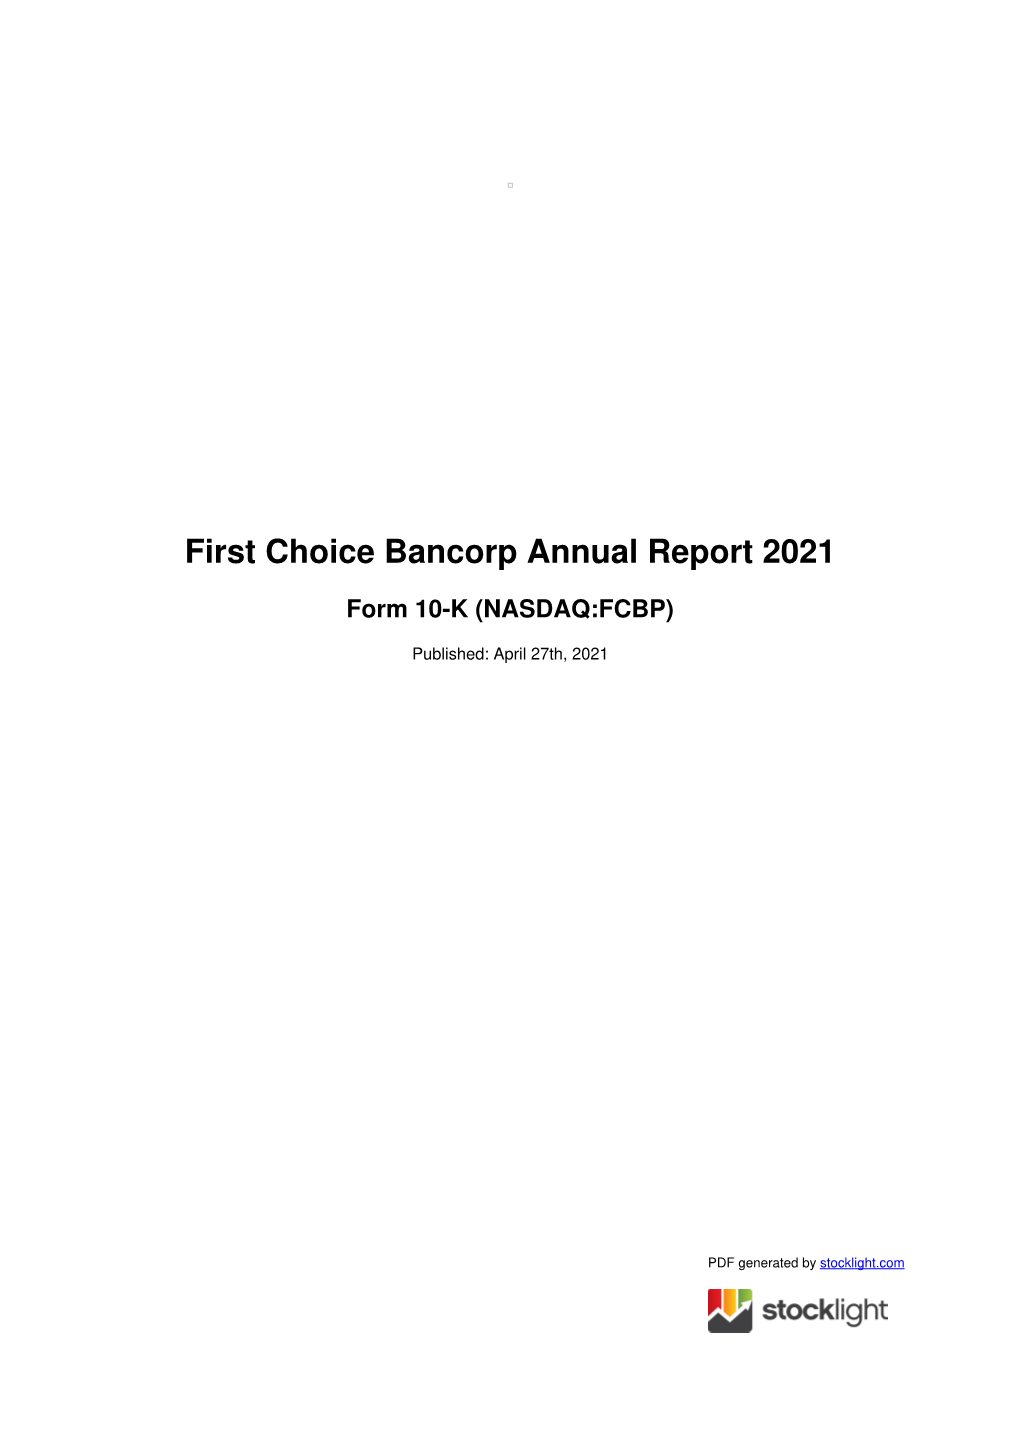 First Choice Bancorp Annual Report 2021